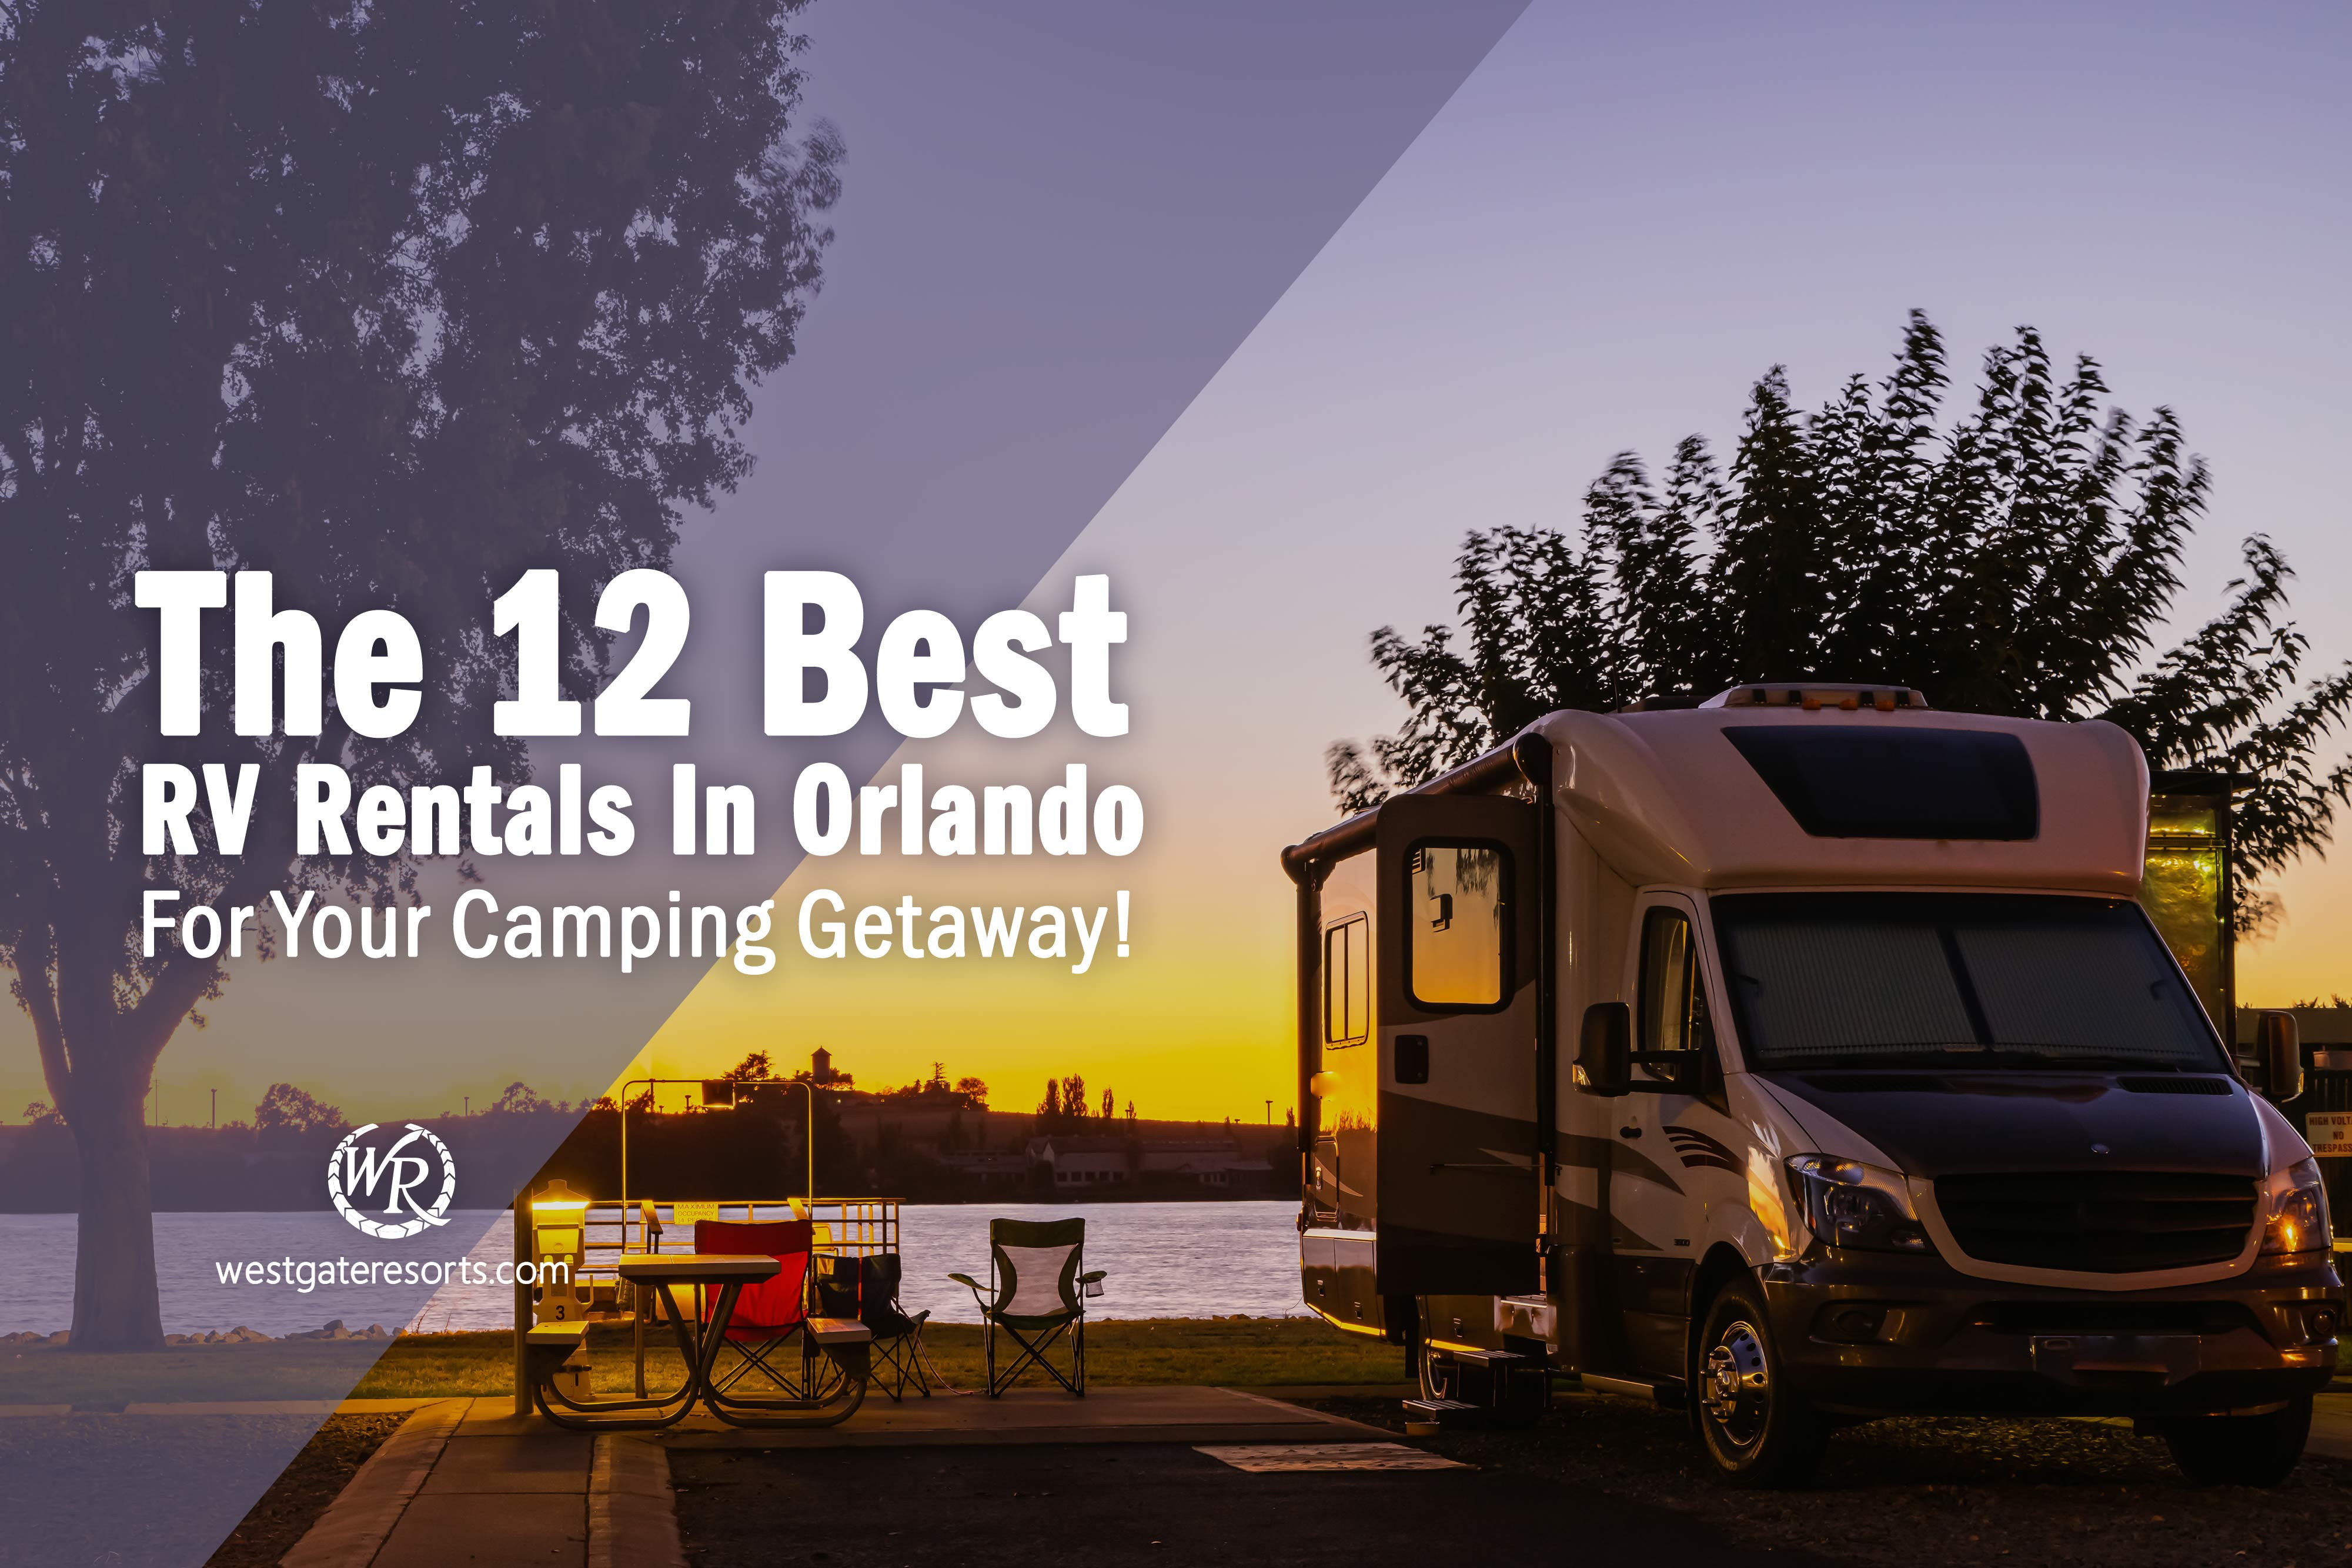 The 12 Best RV Rentals in Orlando For Your Camping Getaway!